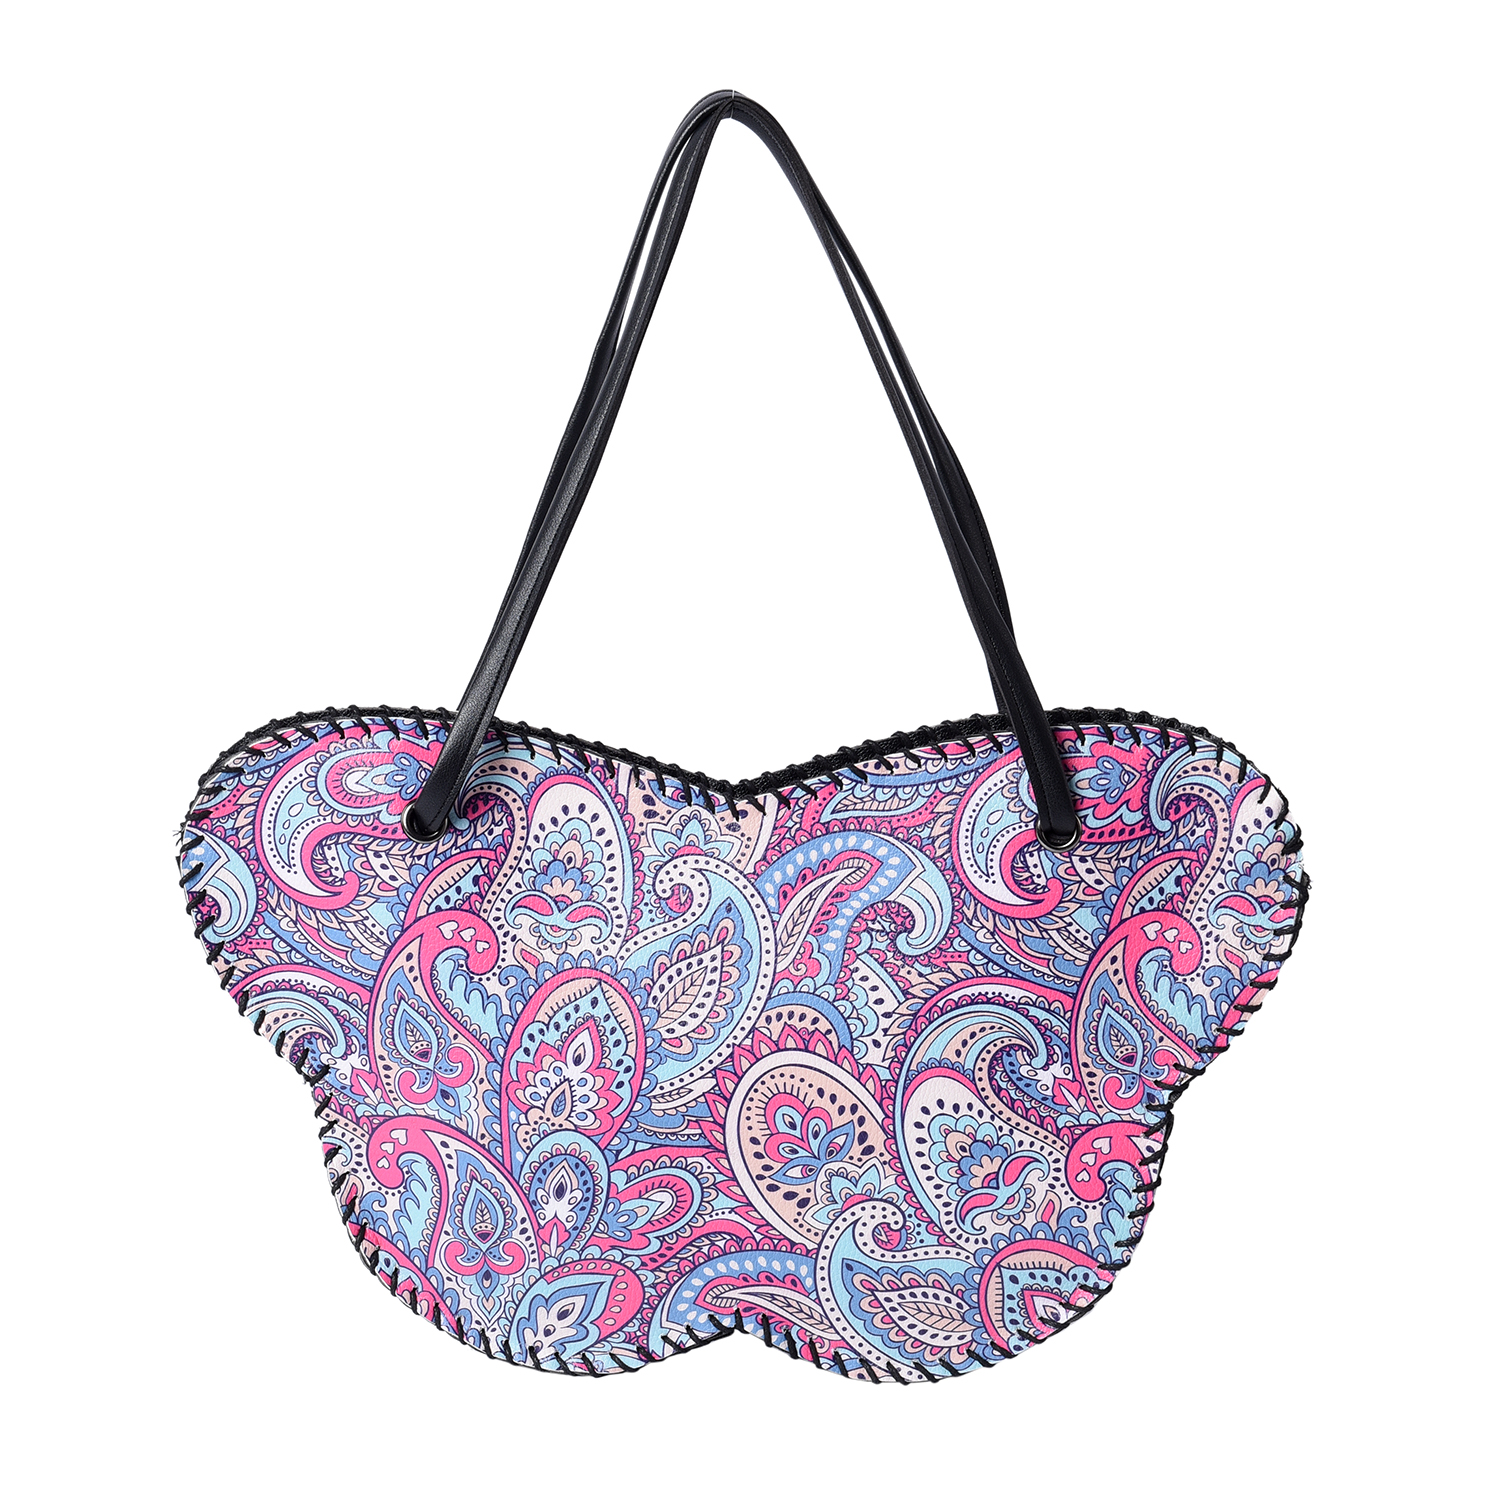 Butterfly-Shaped Water Resistant Tote Bag in Kaleidoscope Pink Print